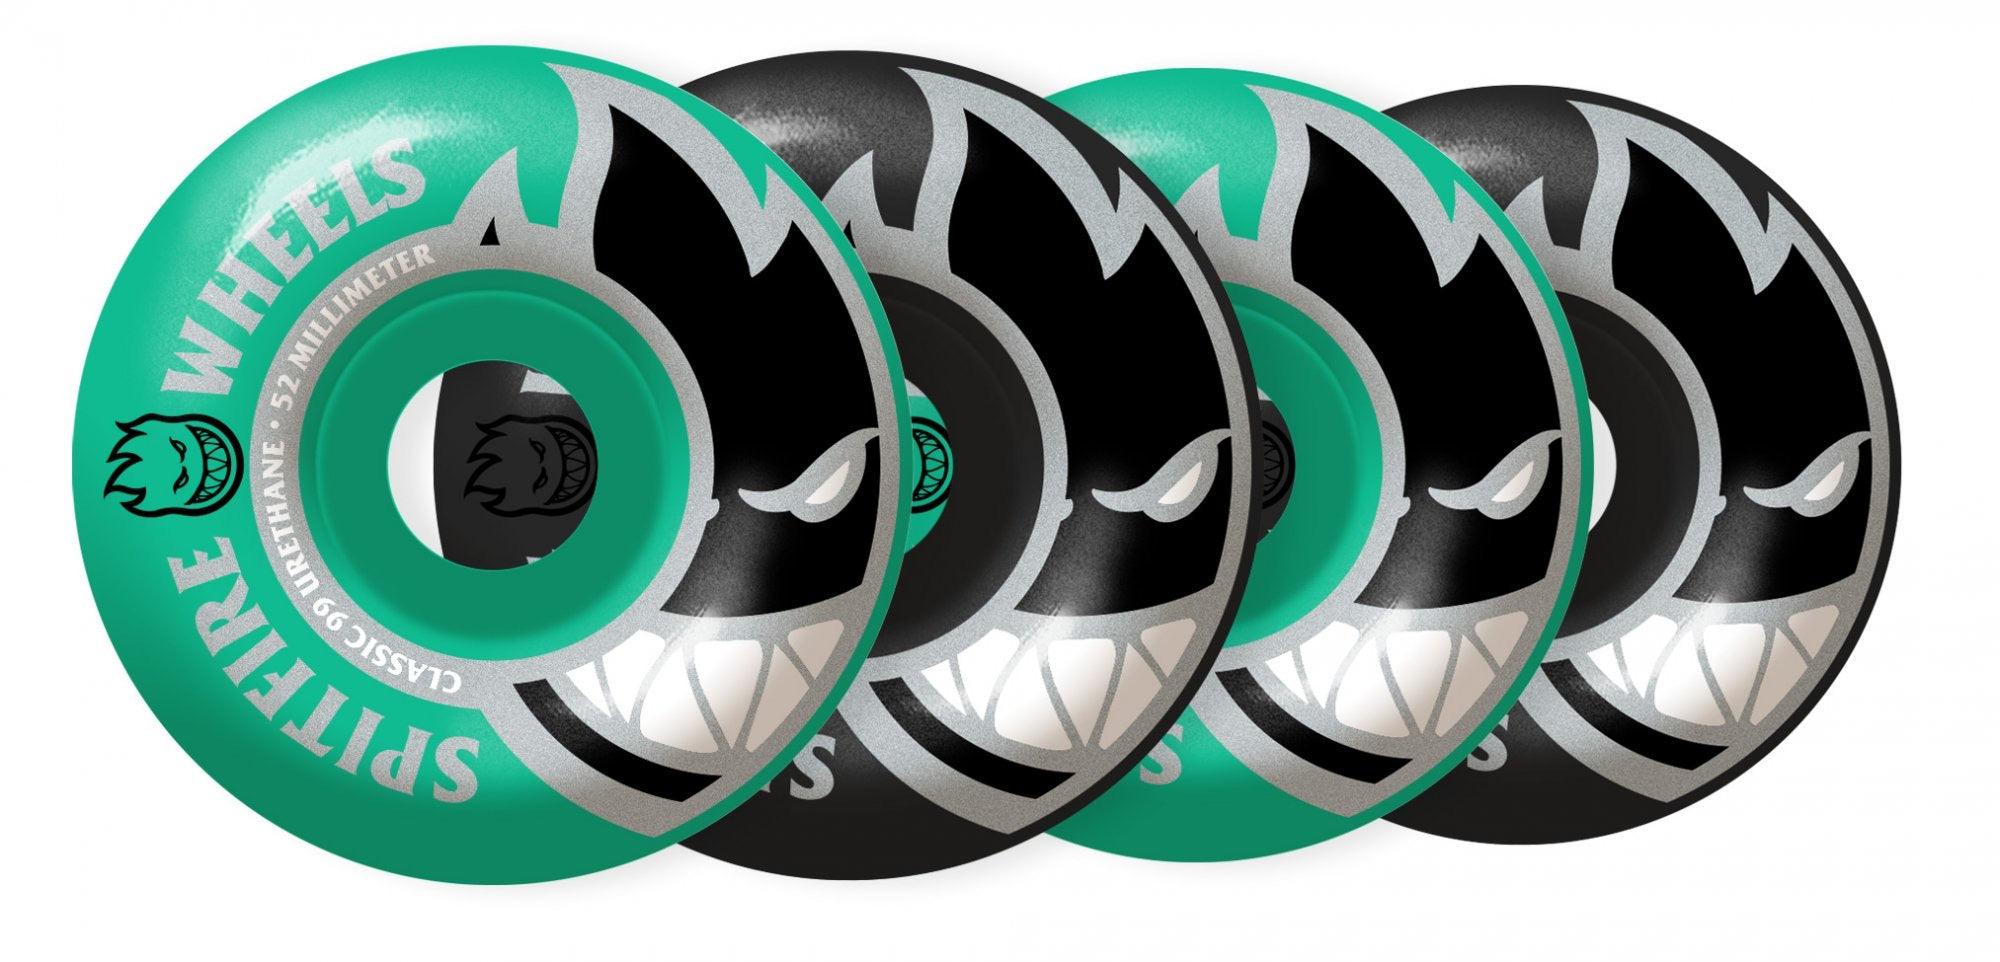 Spitfire Classic 99 Bighead Mash Up (Teal and Black)